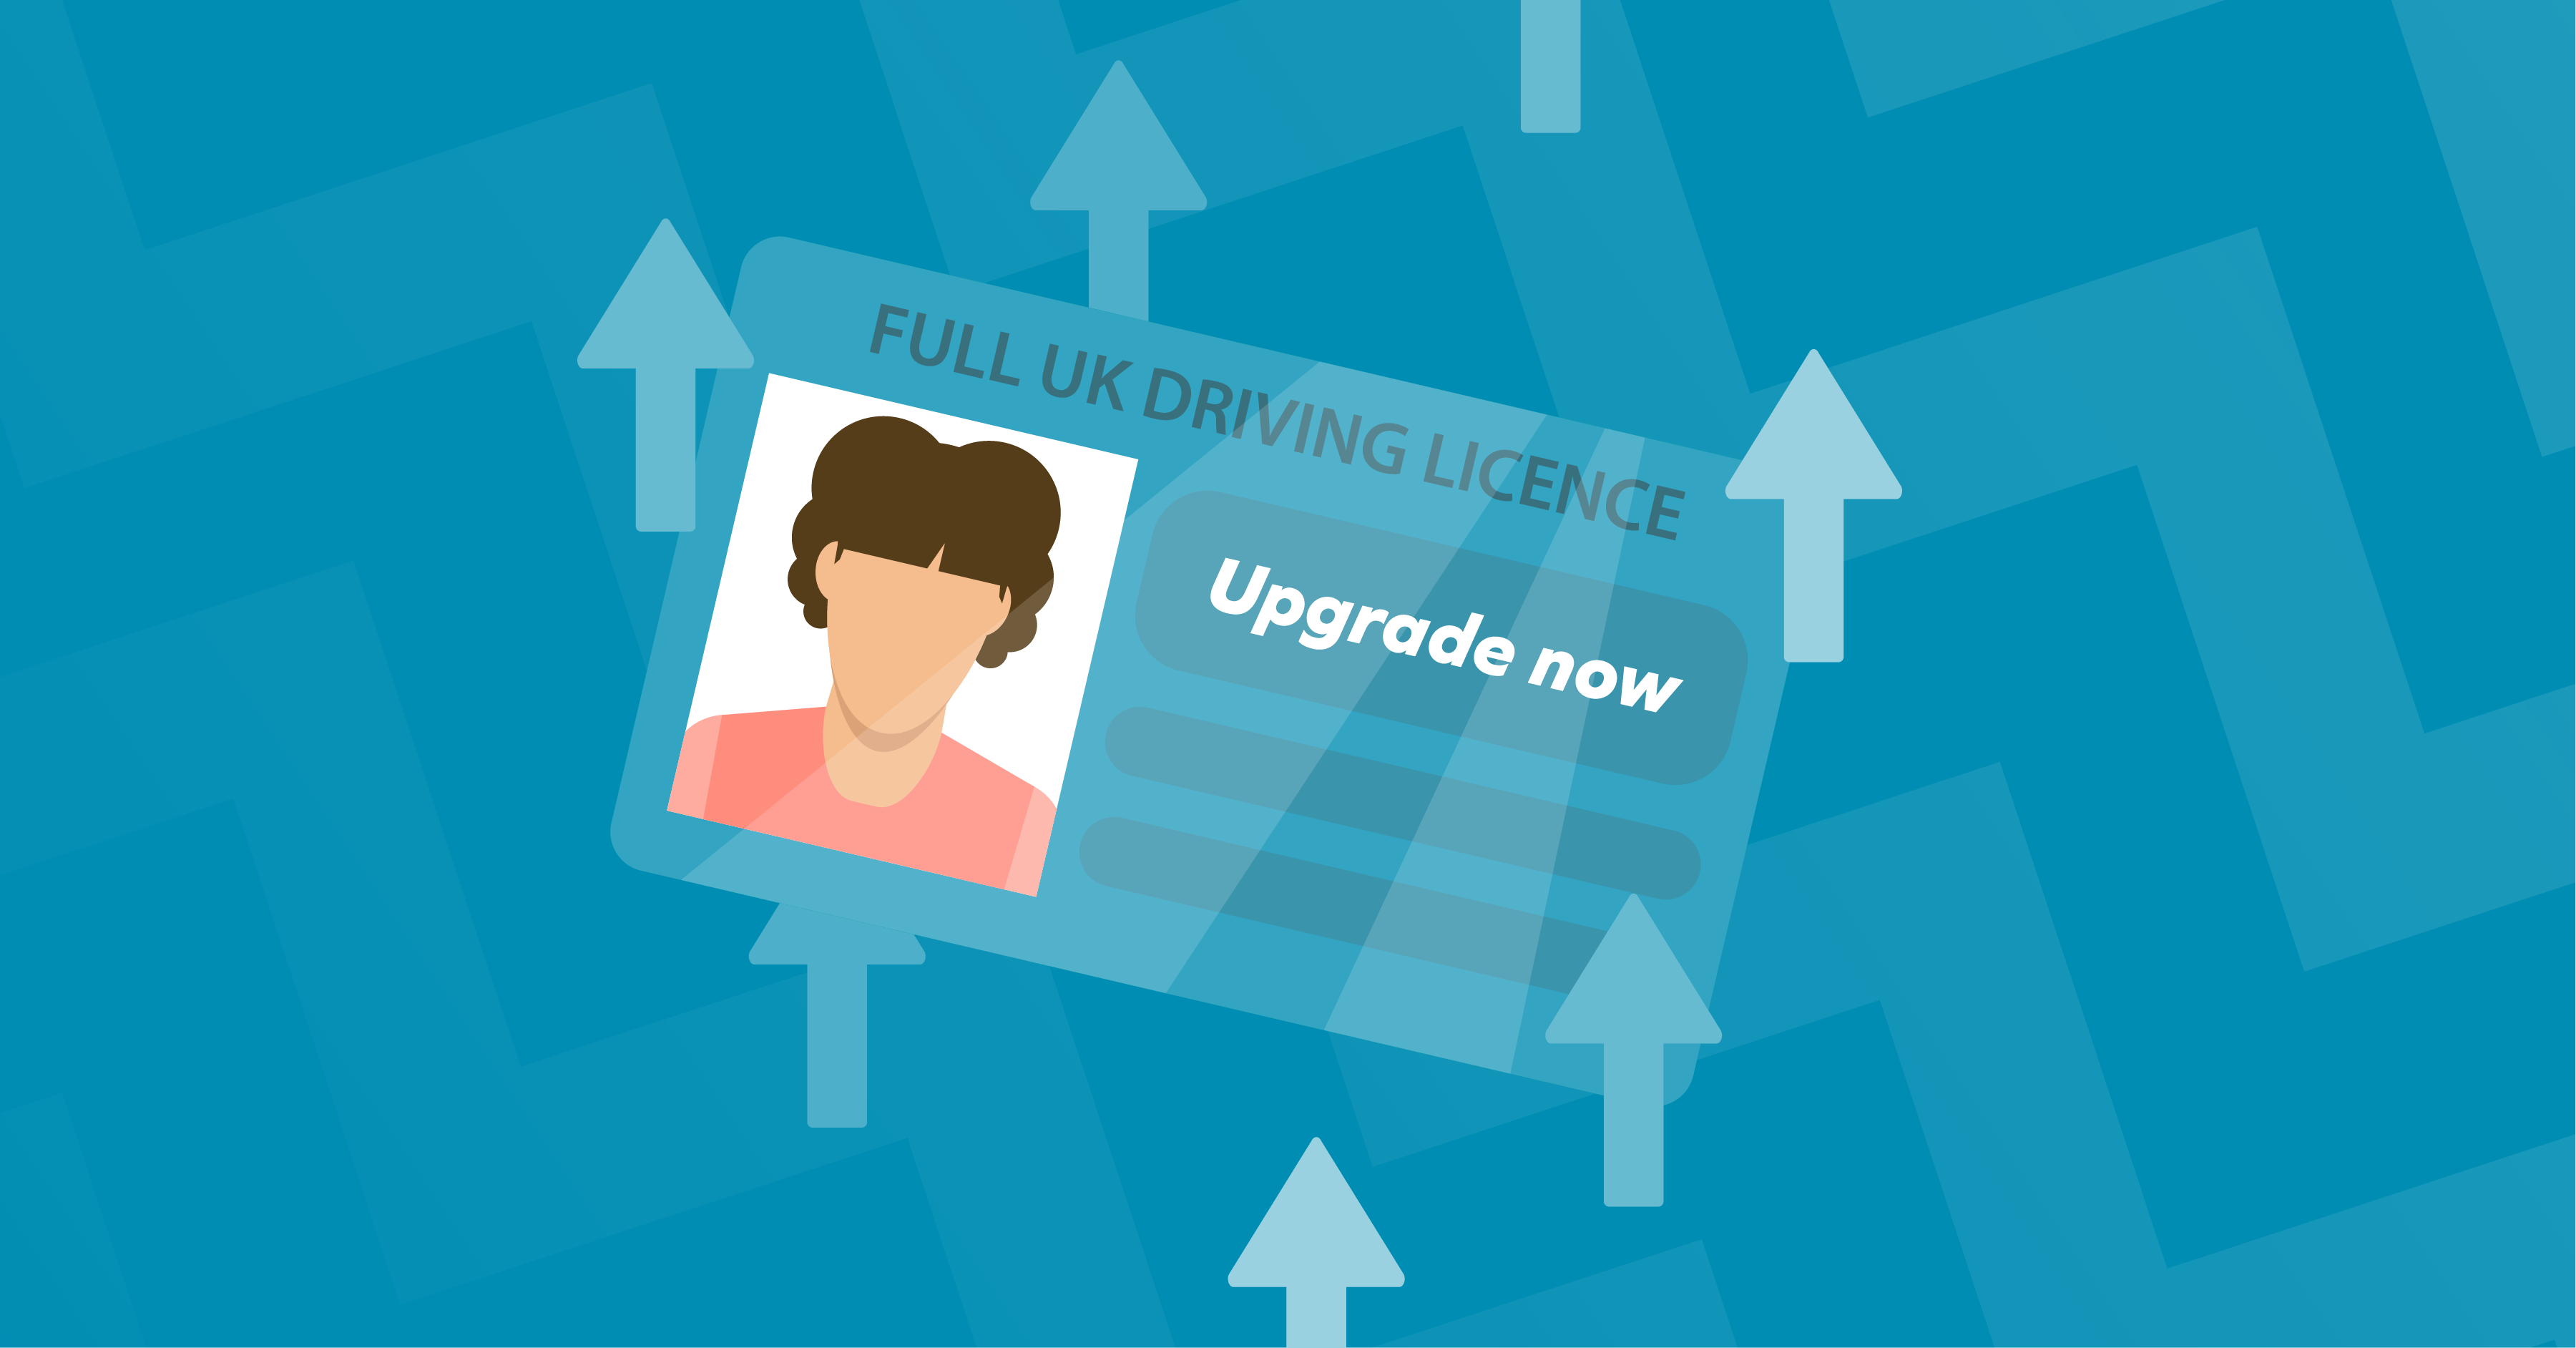 upgrade your license